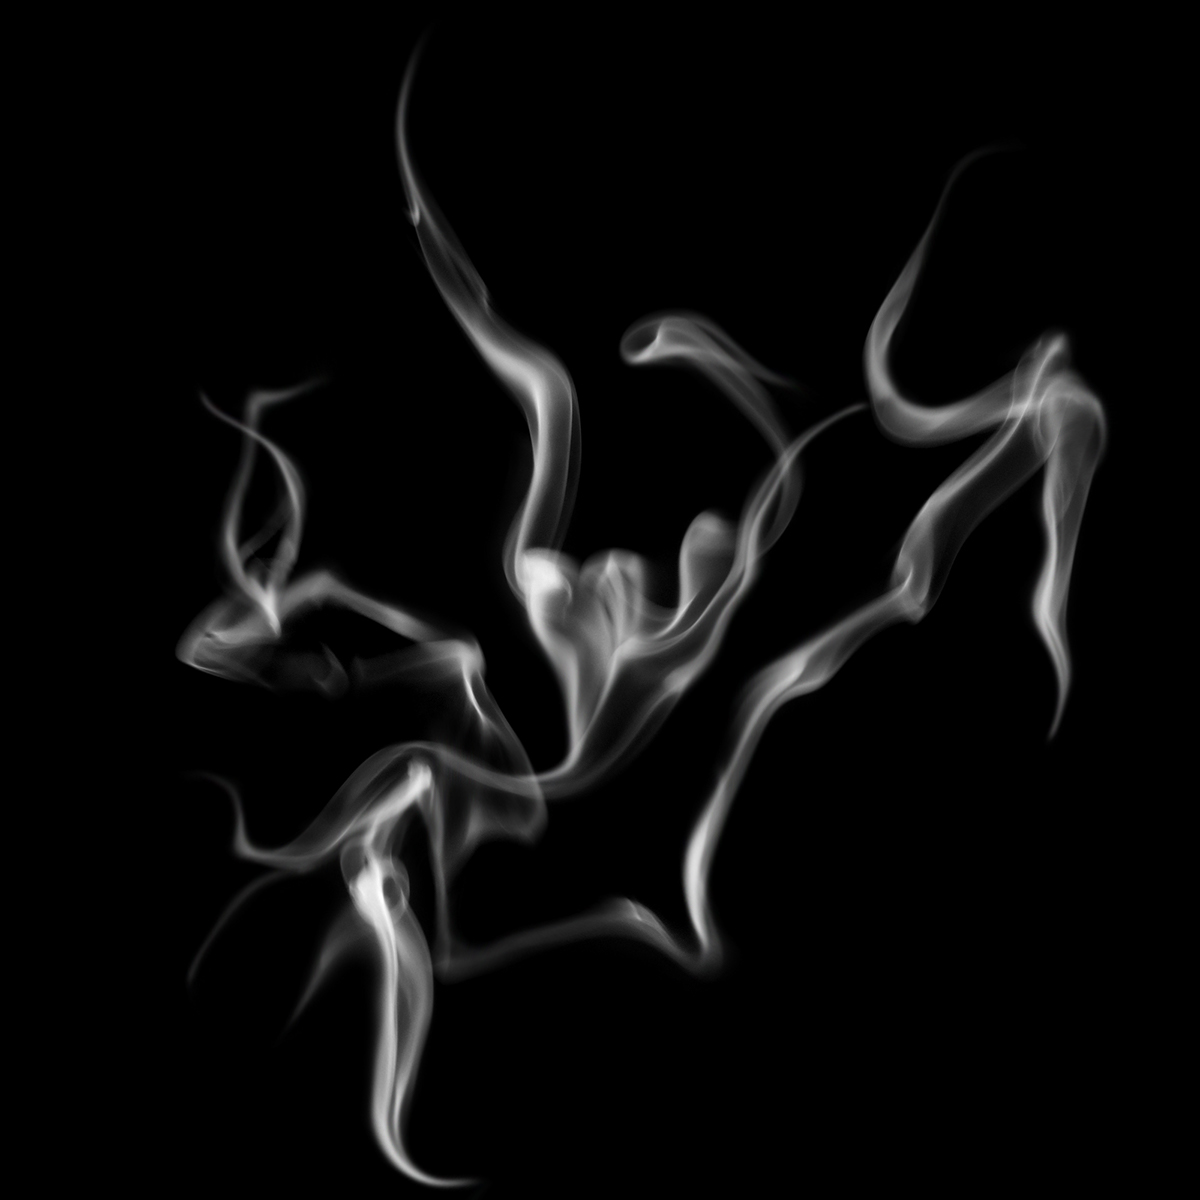 free Form surreal abstract smoke black and white charles andrew seaton charlesandrewseaton